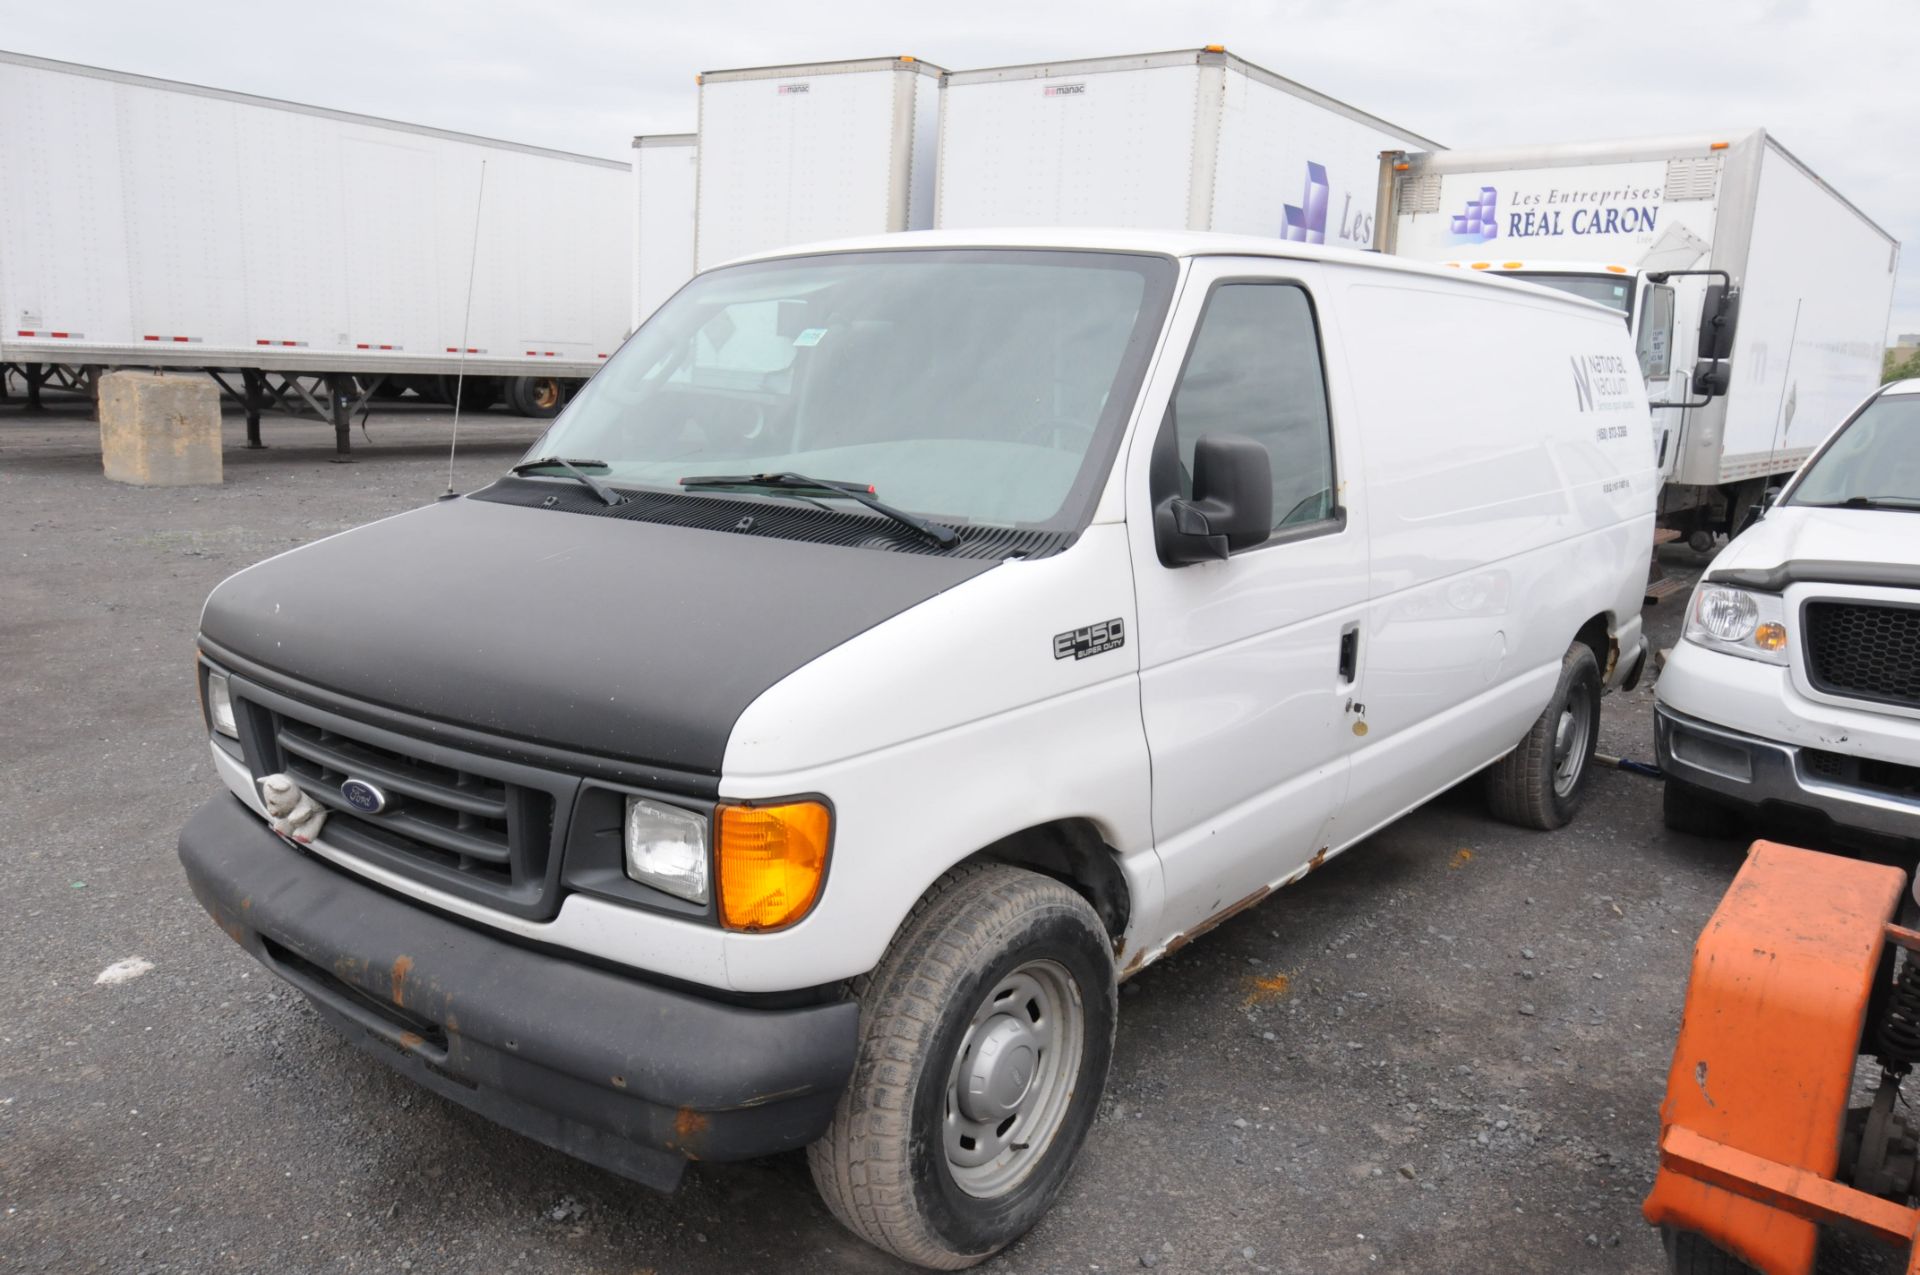 FORD (2005) E150 CARGO VAN WITH 4.8 LITER V8 GAS ENGINE, RWD, AUTO, S/N VIN 1FTRE14W05HA97612 - Image 3 of 7